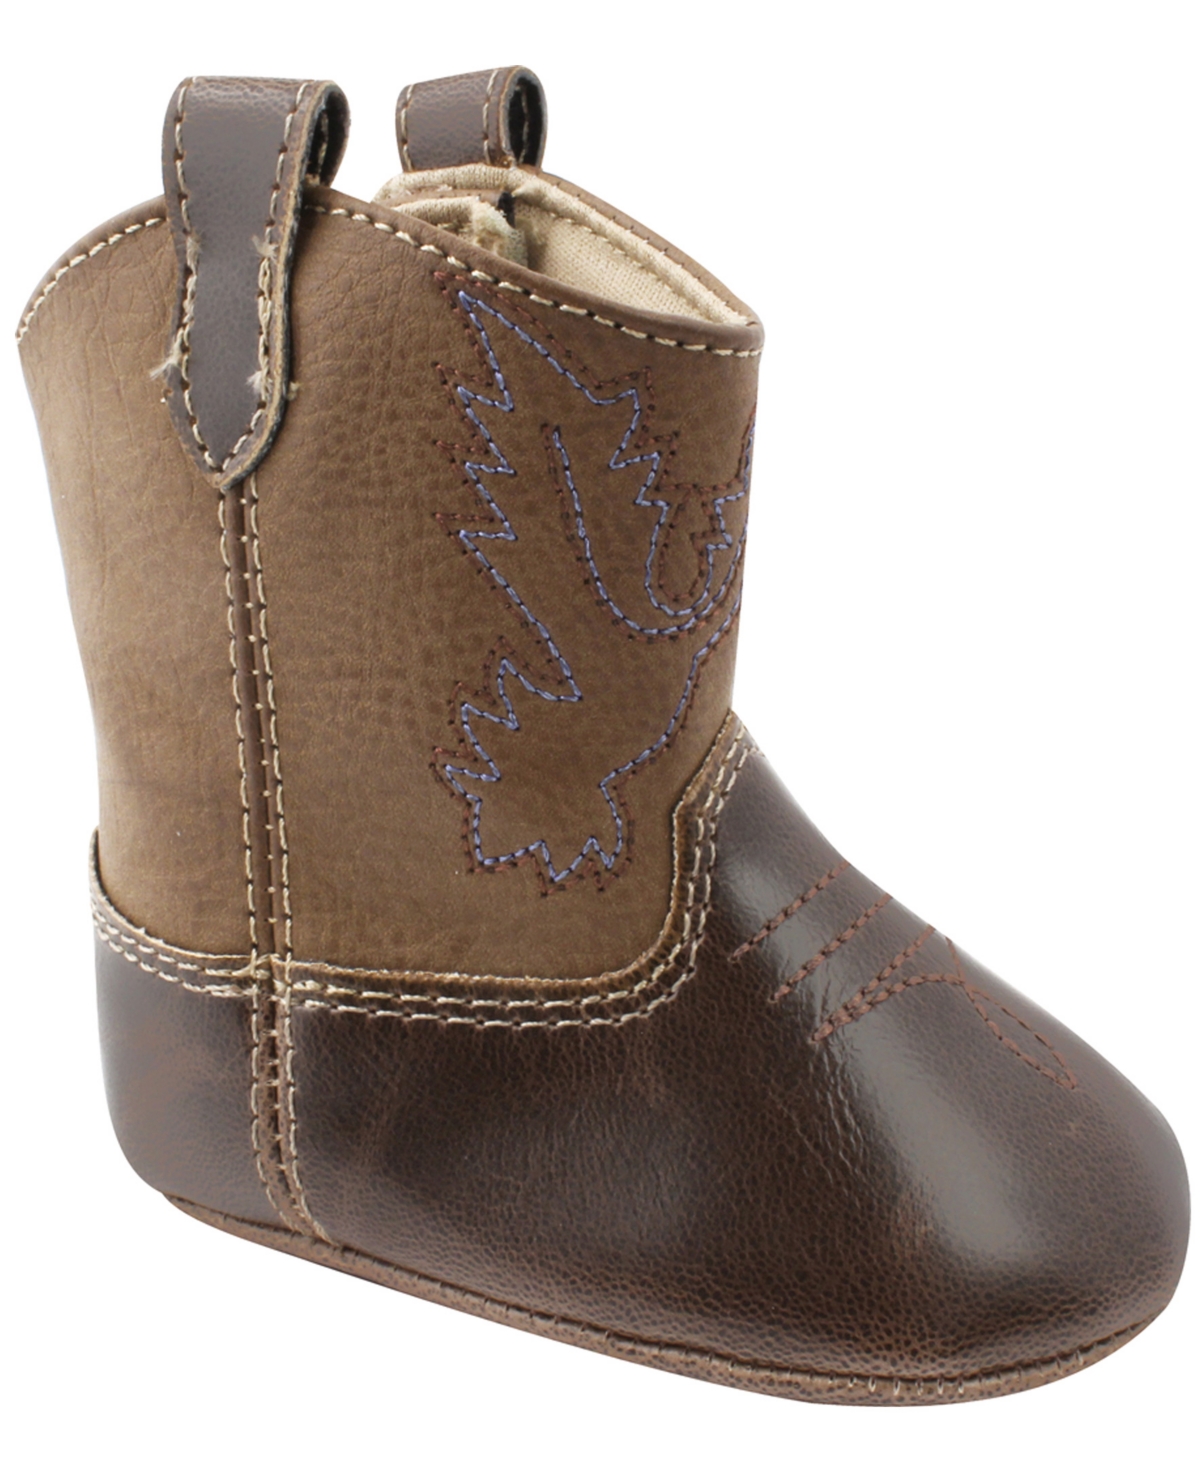 Baby Deer Baby Boys Or Baby Girls Boot With Embroidery And Piping In Brown